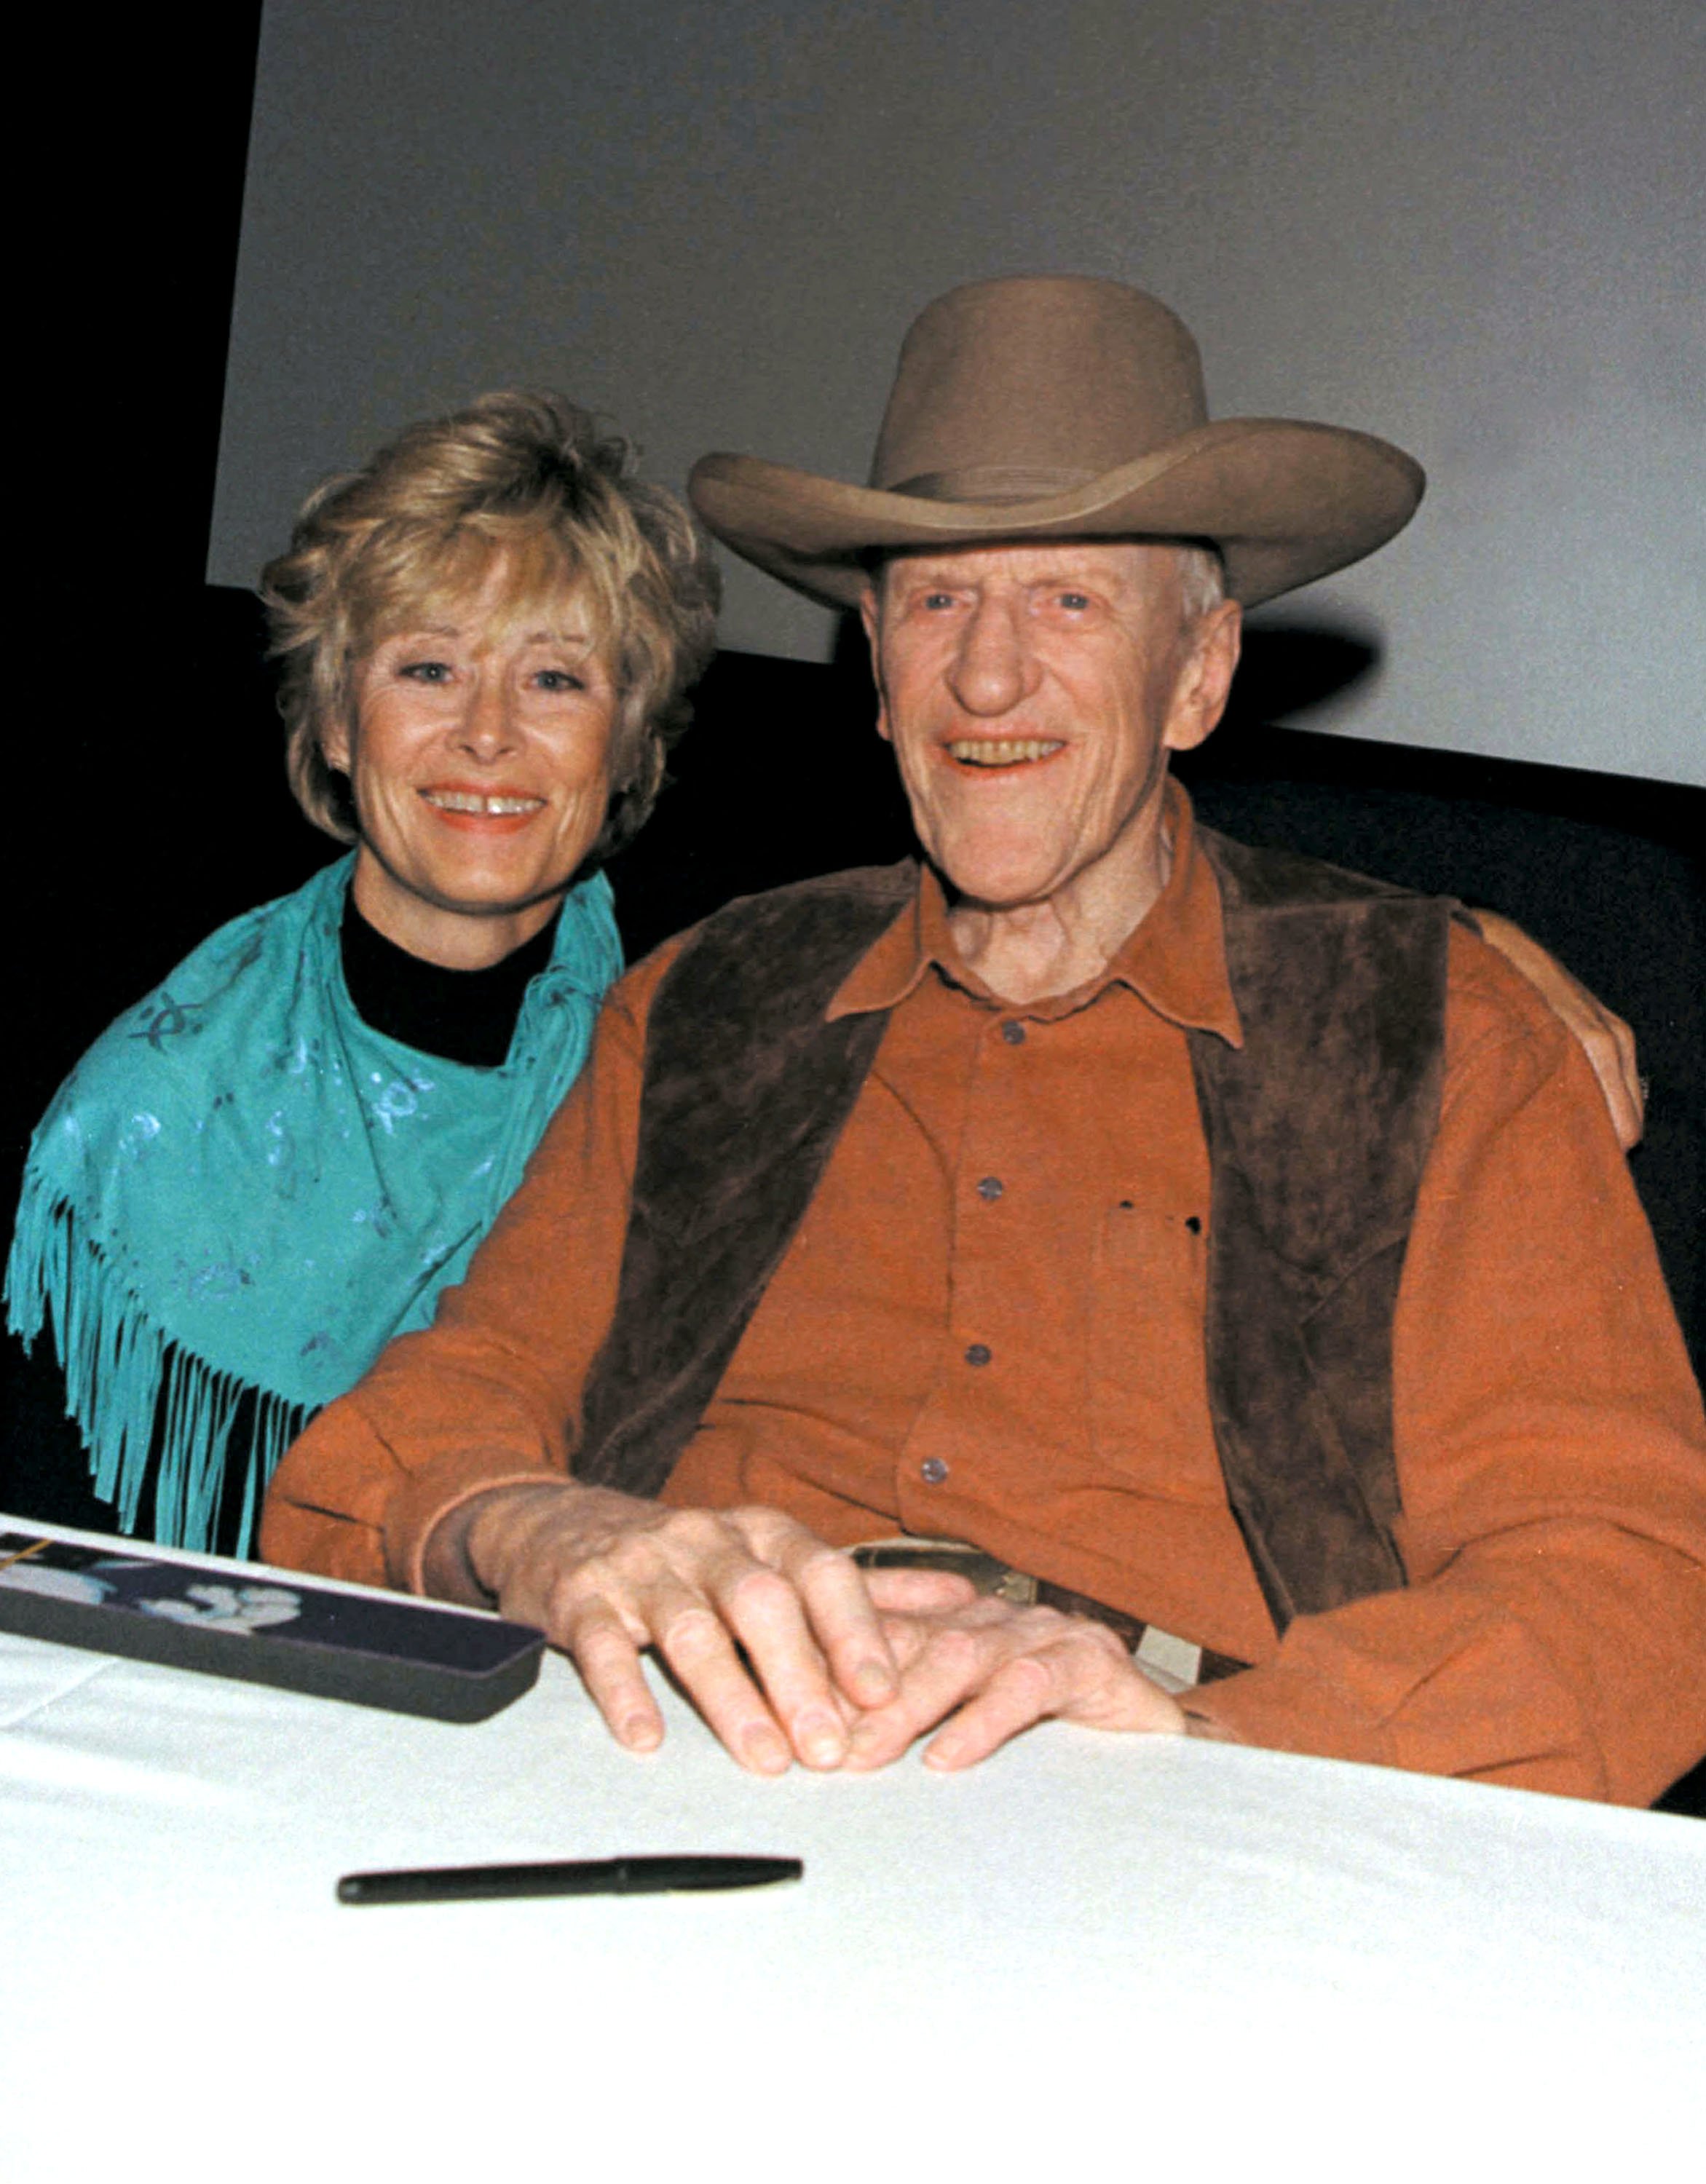  James Arness poses with his wife Janet during a signing of his new book "James Arness: An Autobiography" at the Gene Autry Museum November 3, 2001 | Source: Getty Images